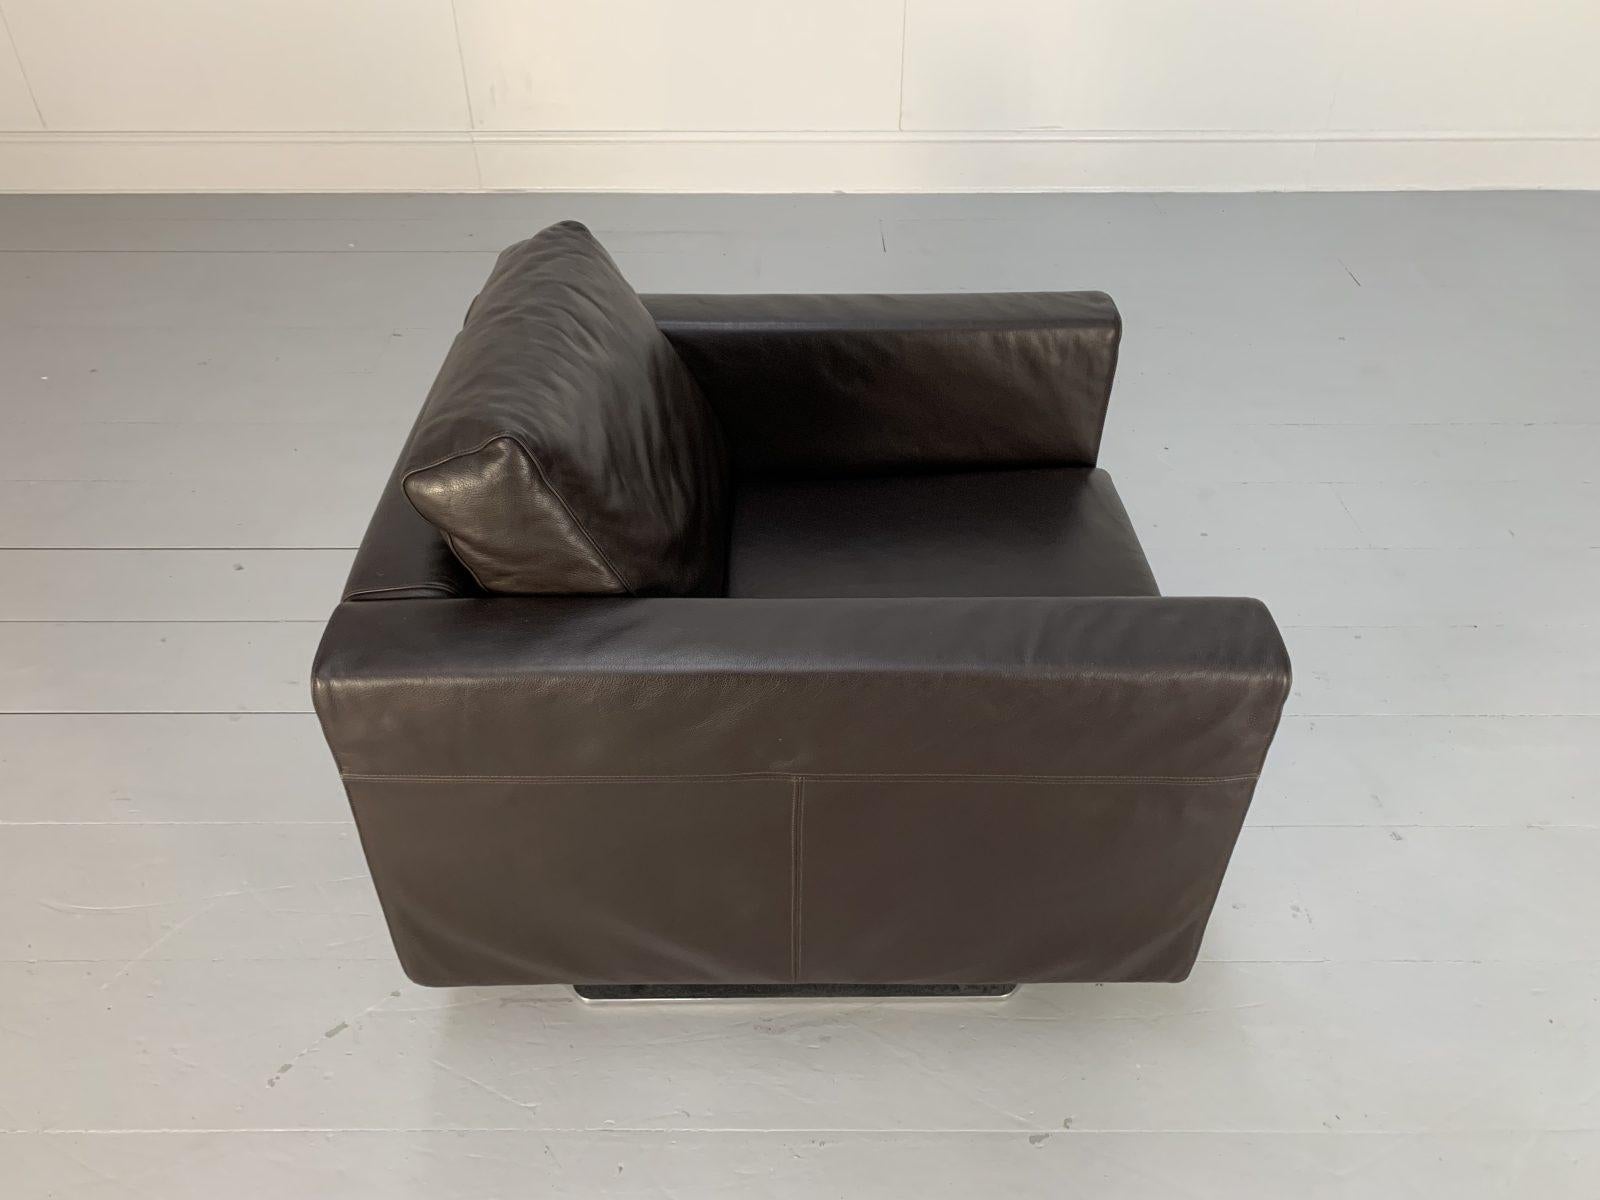 Vitra “Park” 2 Sofa & Armchair Suite, in Dark Brown Leather For Sale 10